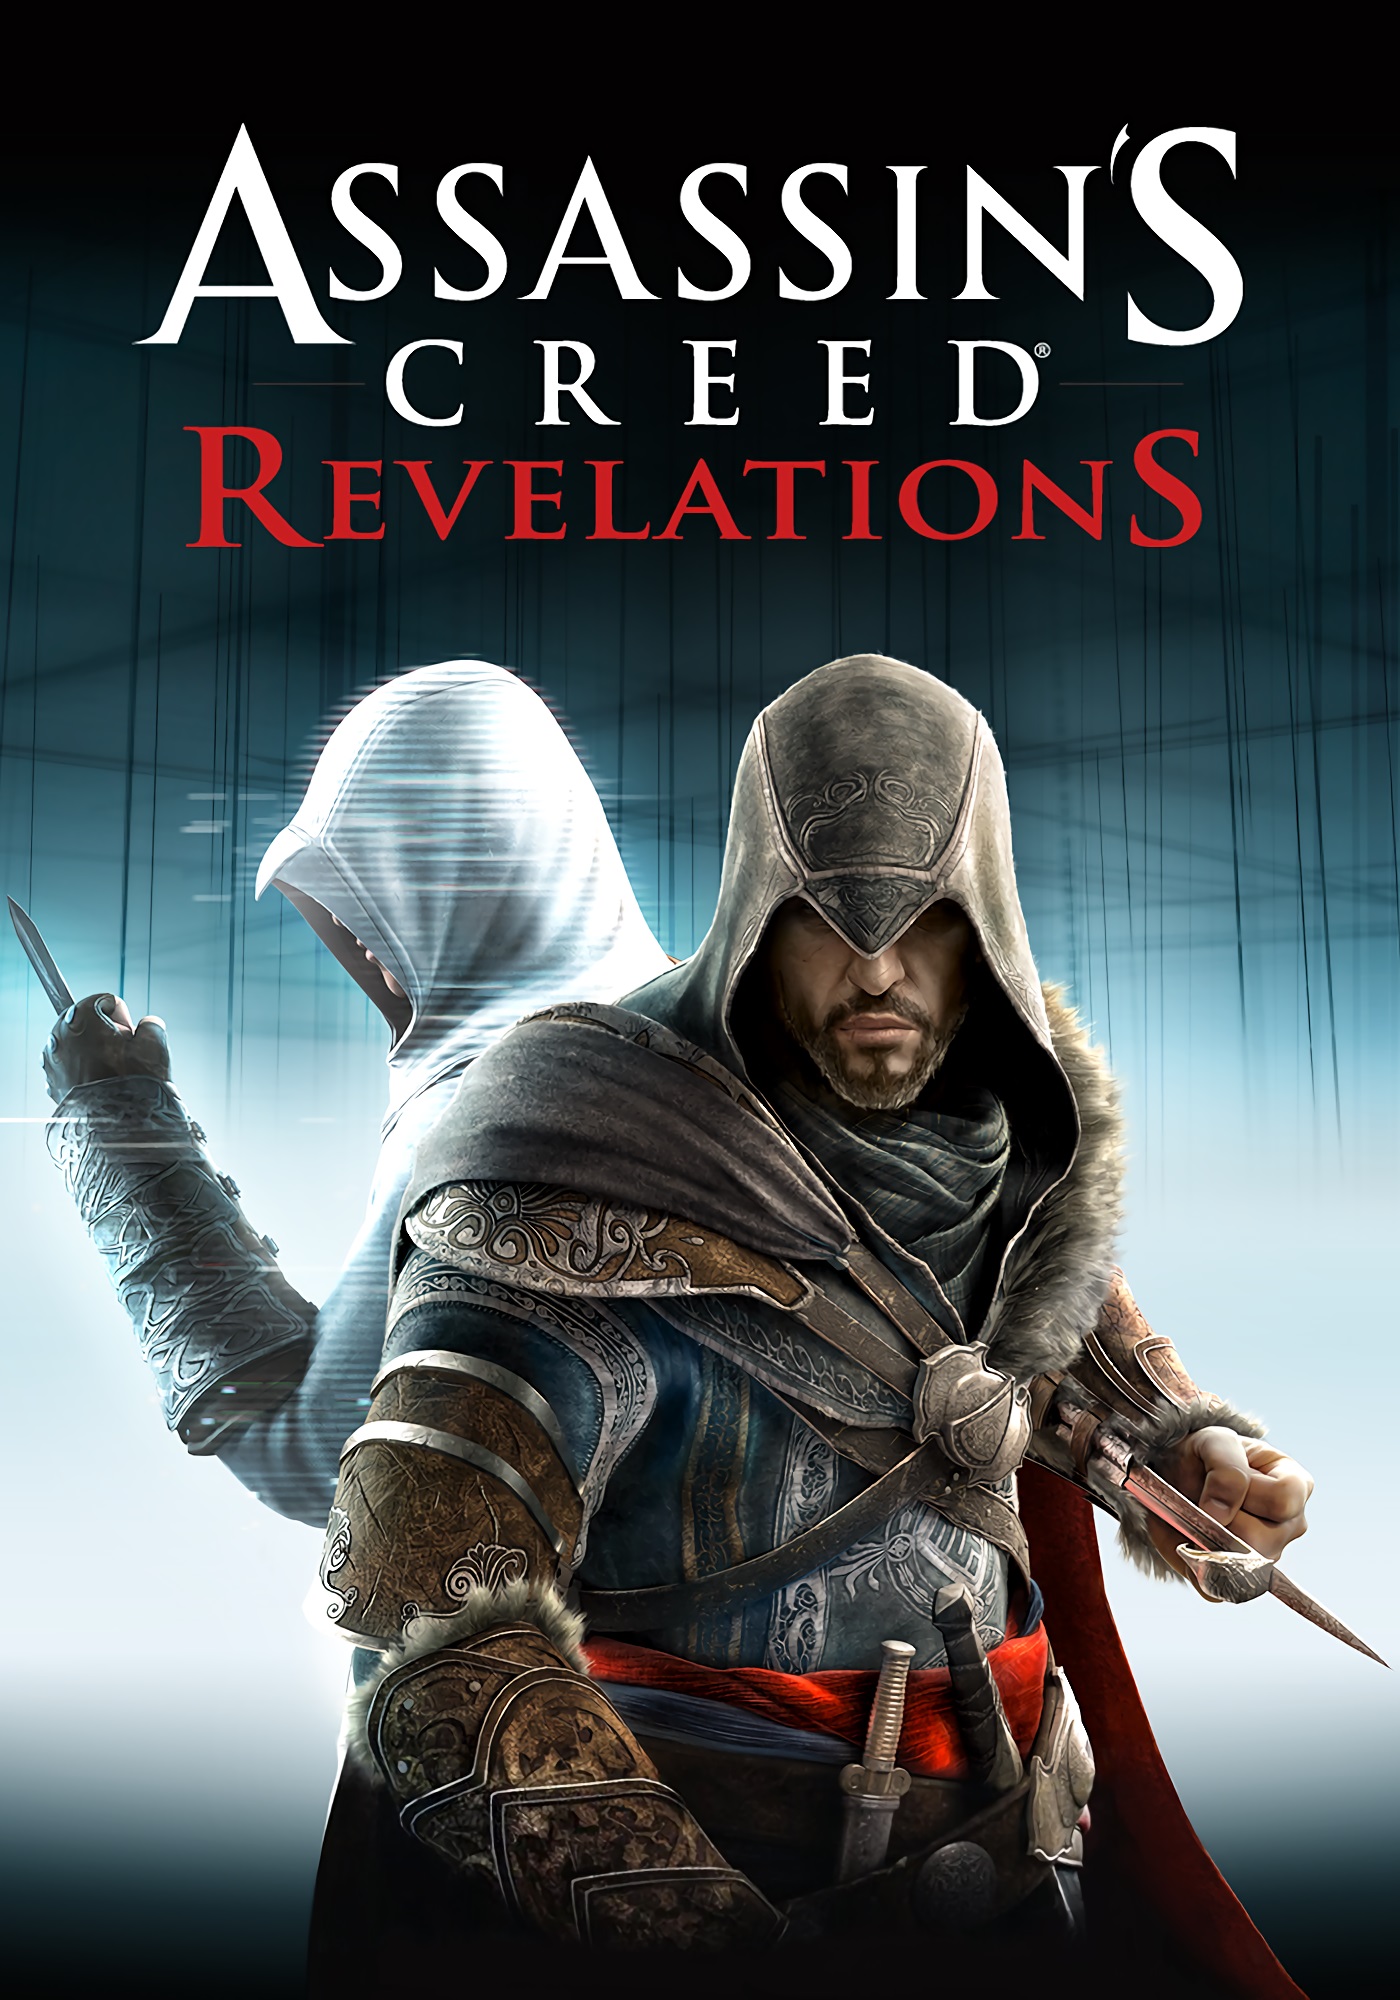 Download Assassin’s Creed Revelations Full Game